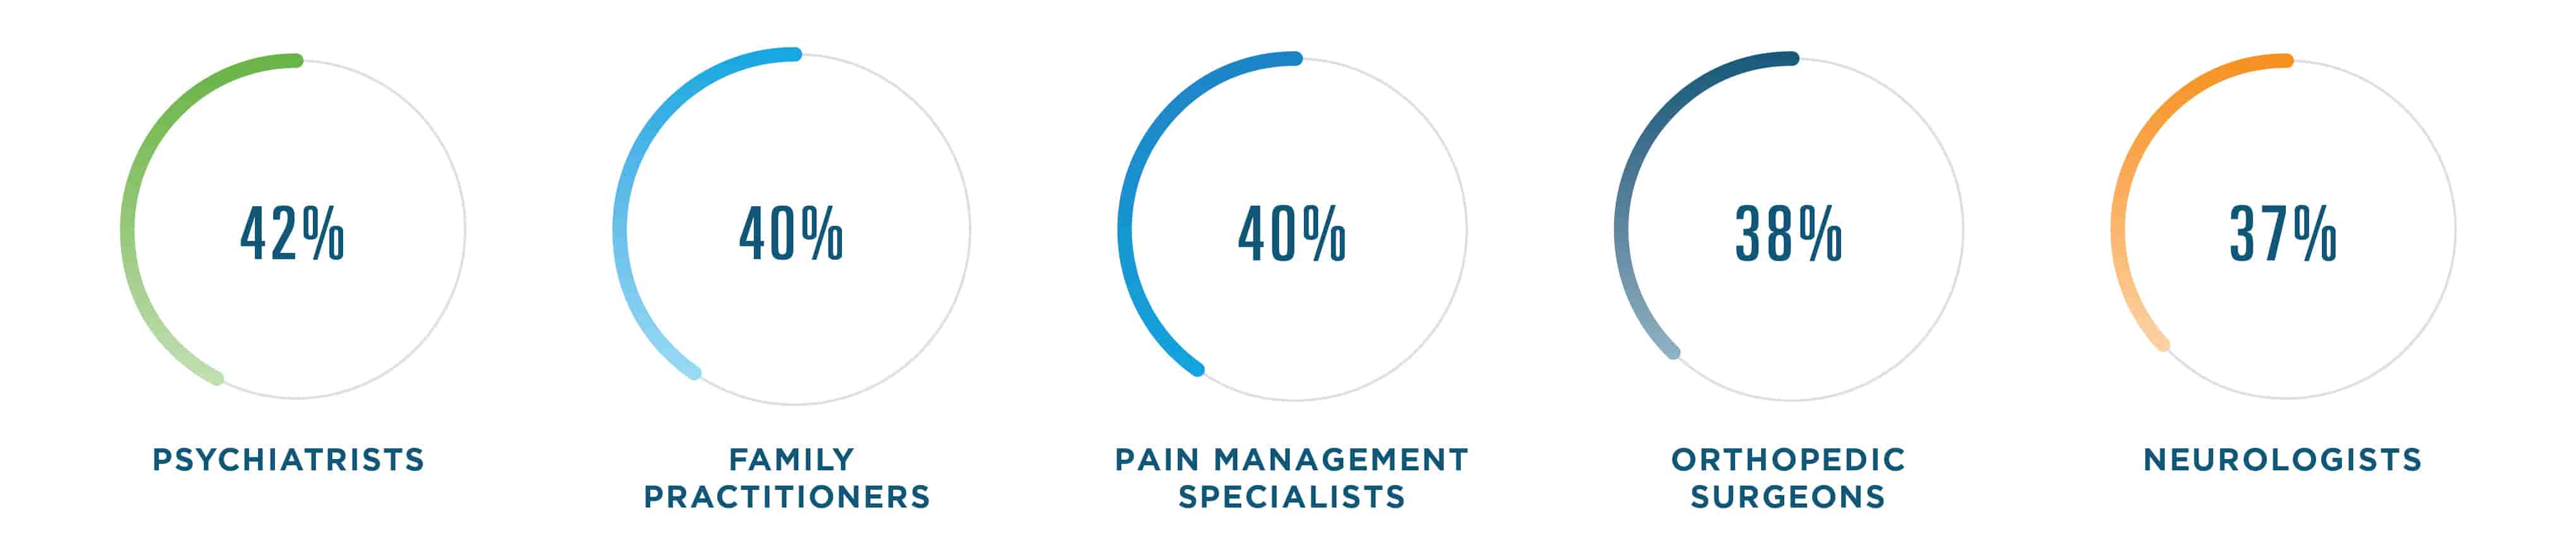 42% of psychiatrists, 40% of family practitioners and pain management specialists, 38% of orthopedic surgeons and 37% of neurologists used EPCS in 2019.